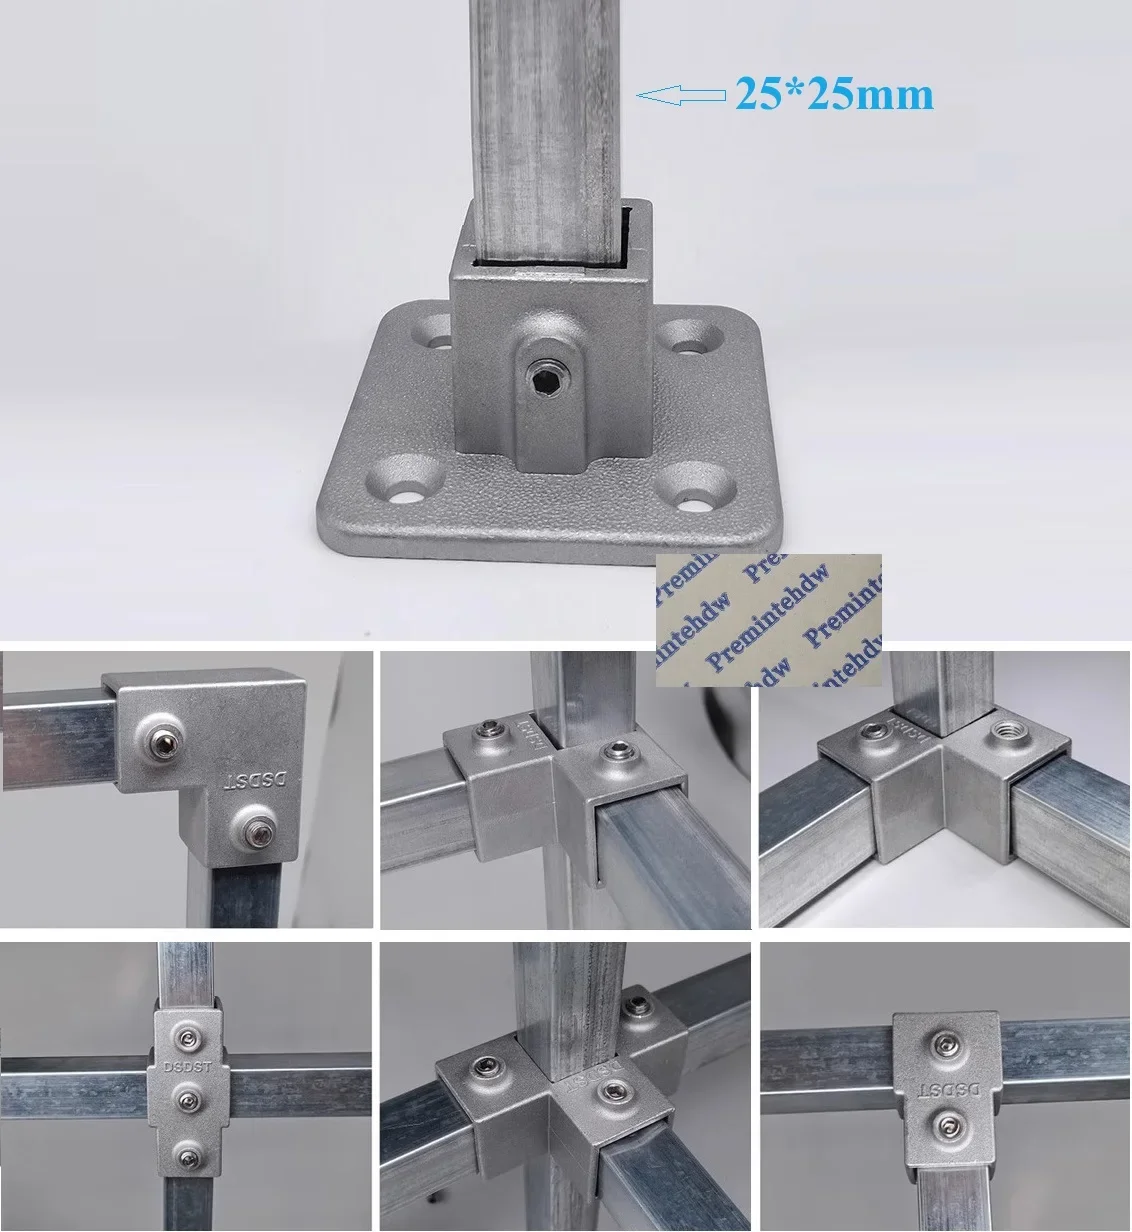 

4Pcs Cast Aluminum 25*25mm Square Pipe Rail Clamp Hex Grub Nut Tee Corner For DIY Stand Rack Fence